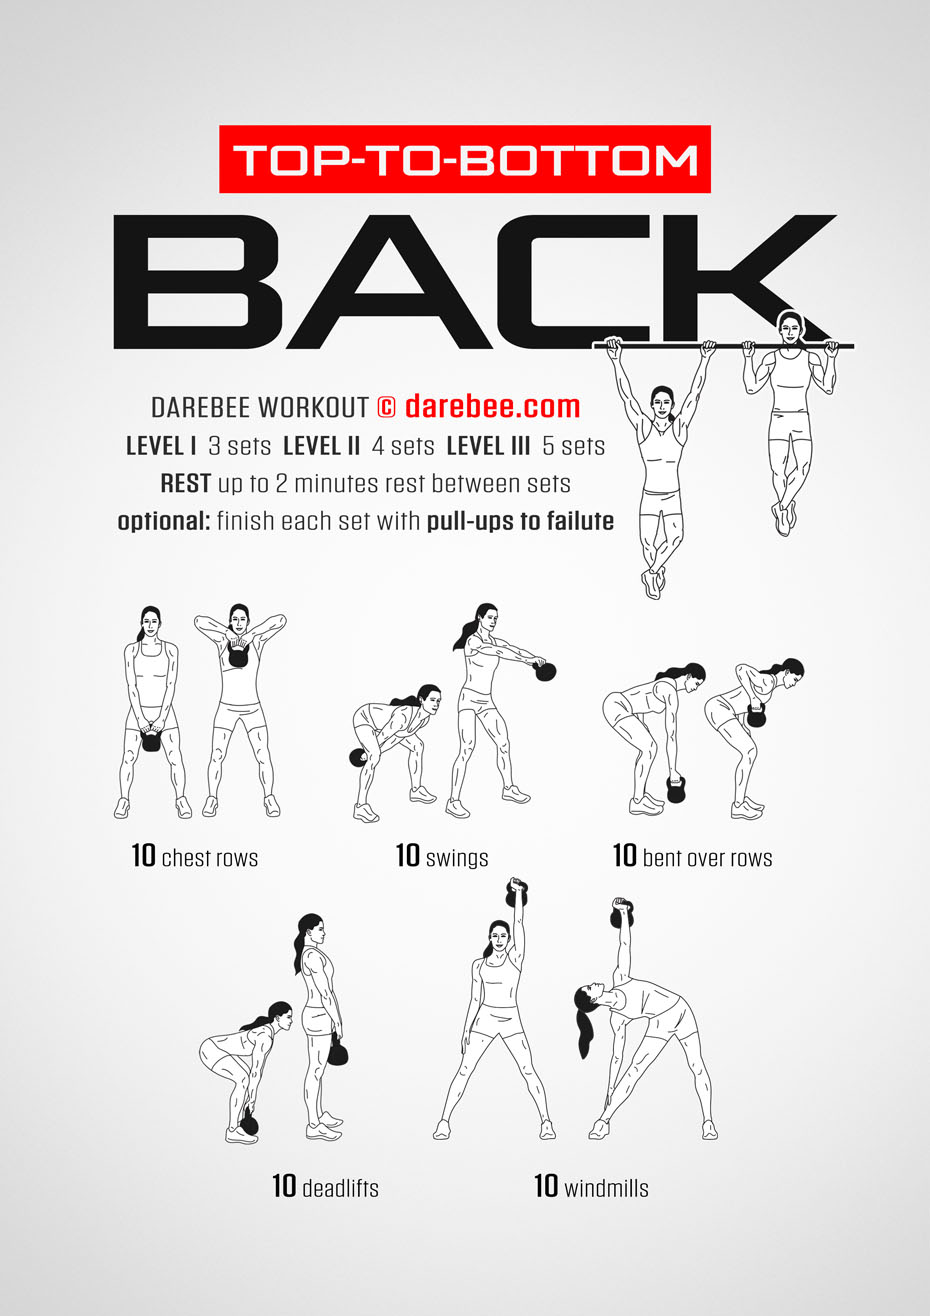 Back Workout: Five routines for a stronger, healthier back